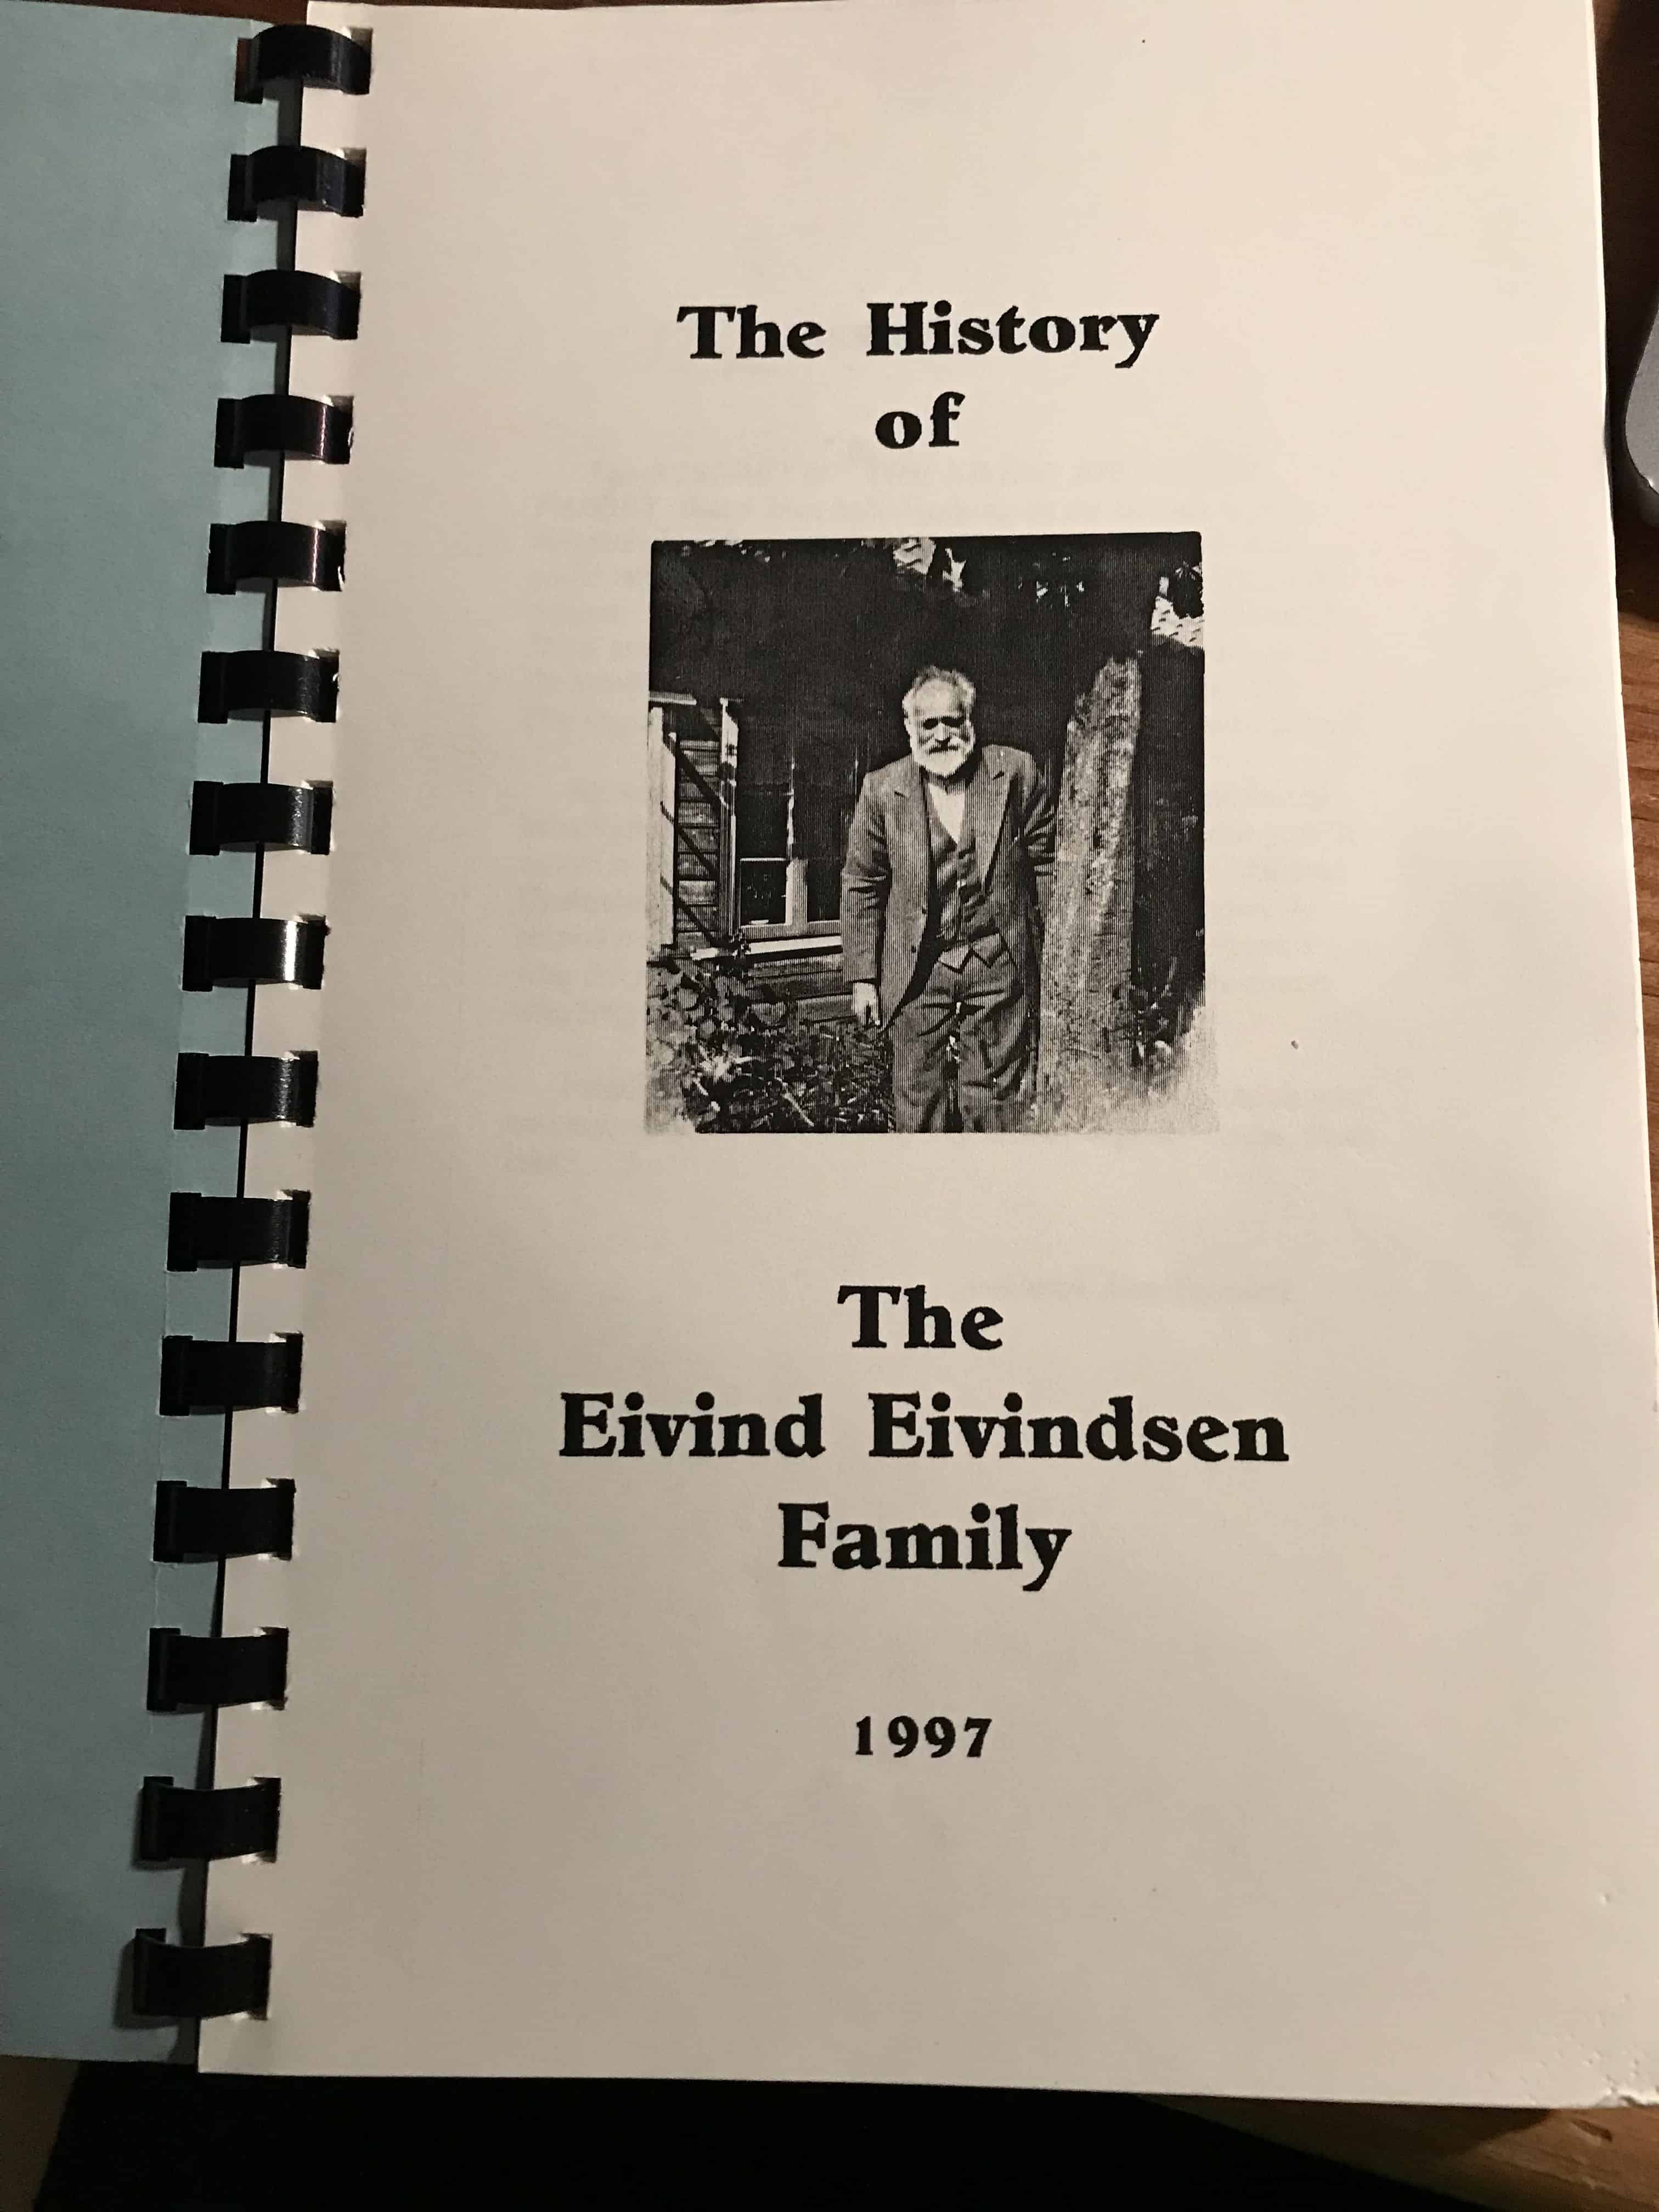 book page spiral bound. text says the history of the divine eivindsen family 1997